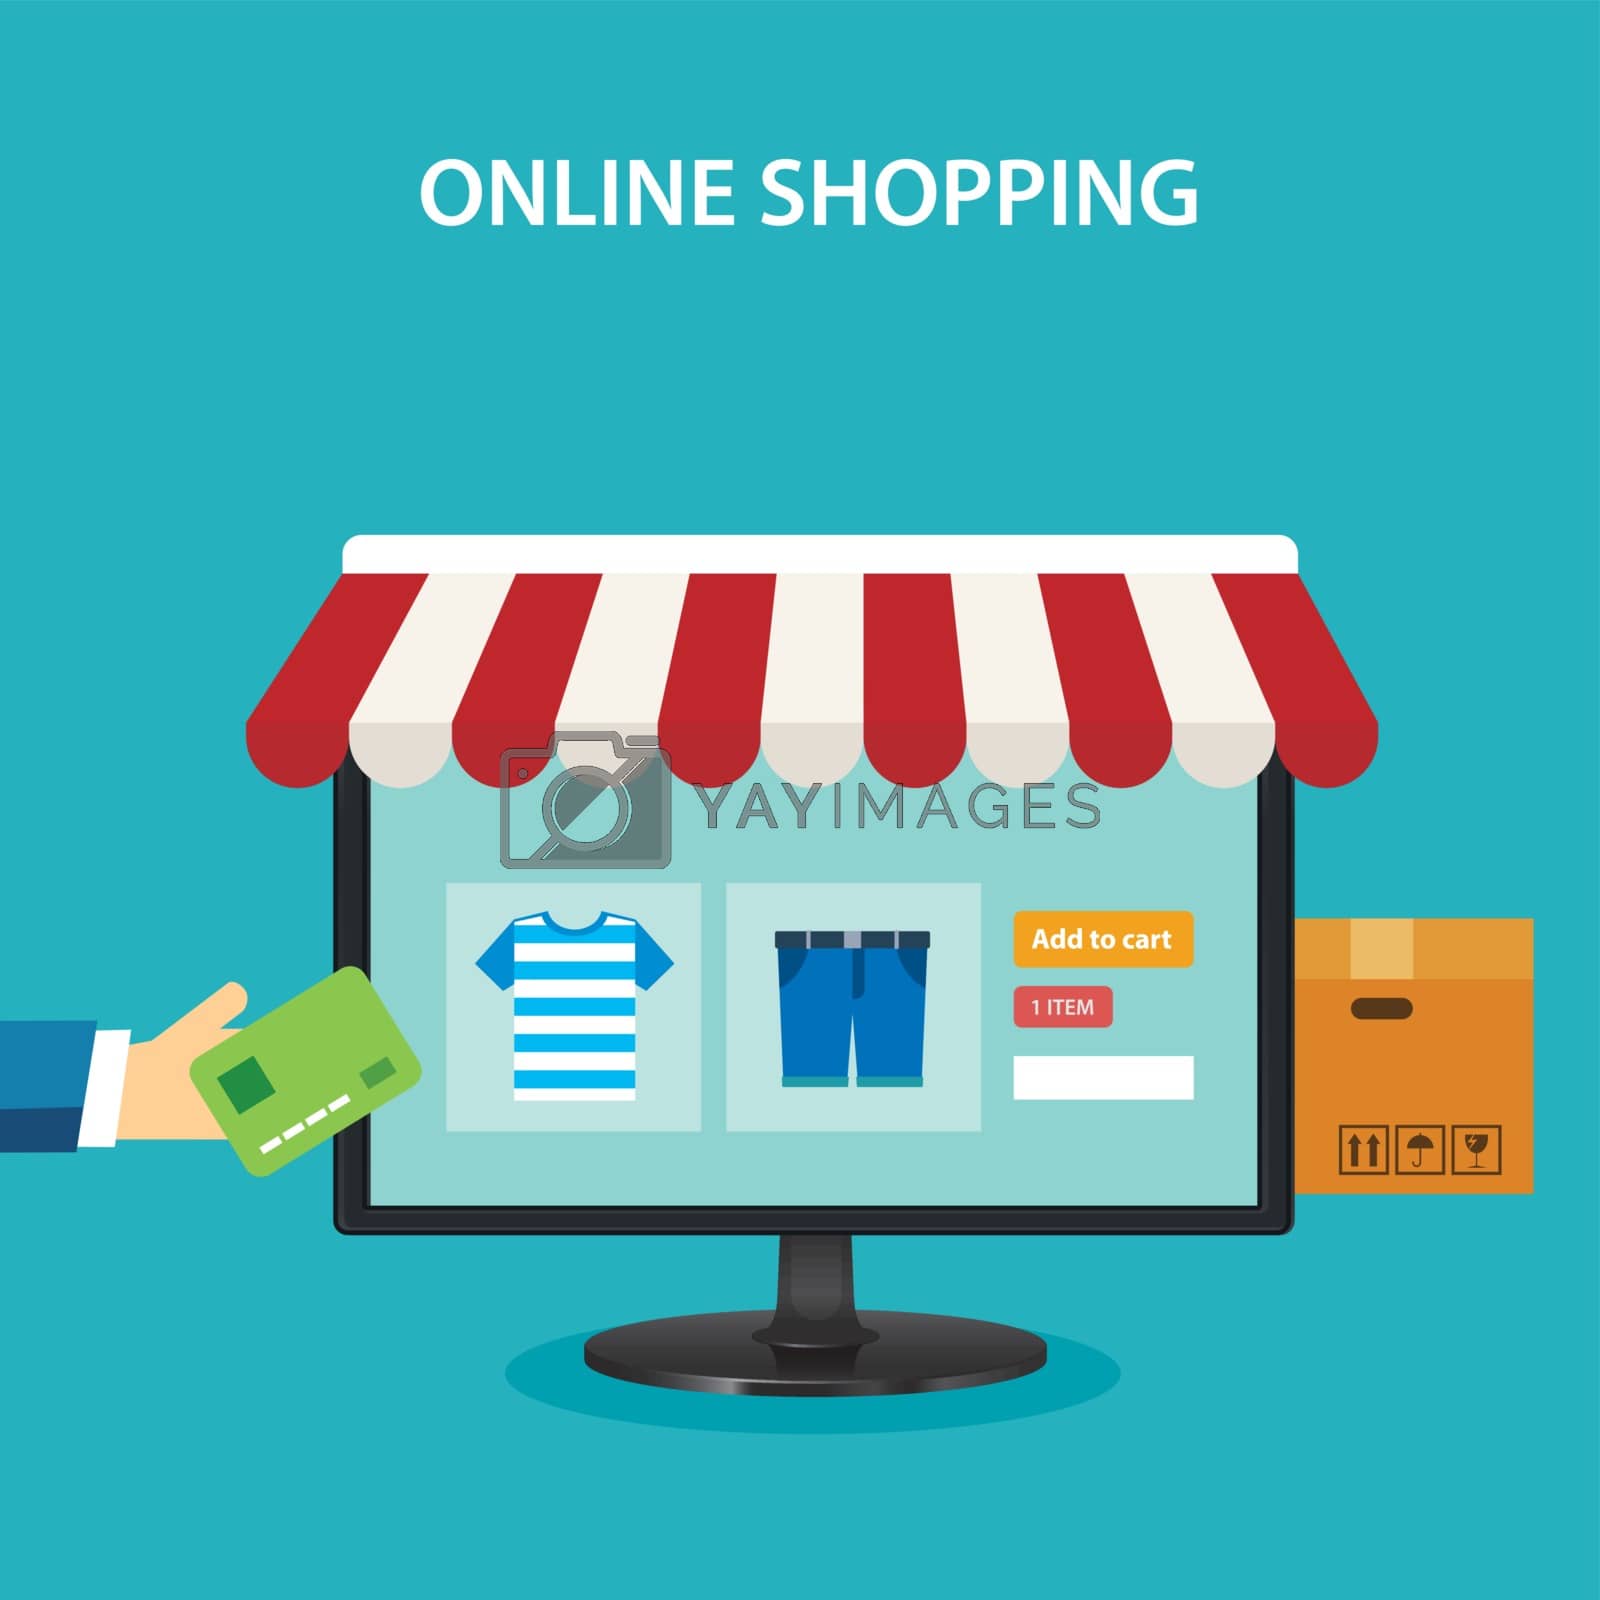 Royalty free image of online shopping concept flat design by kaisorn